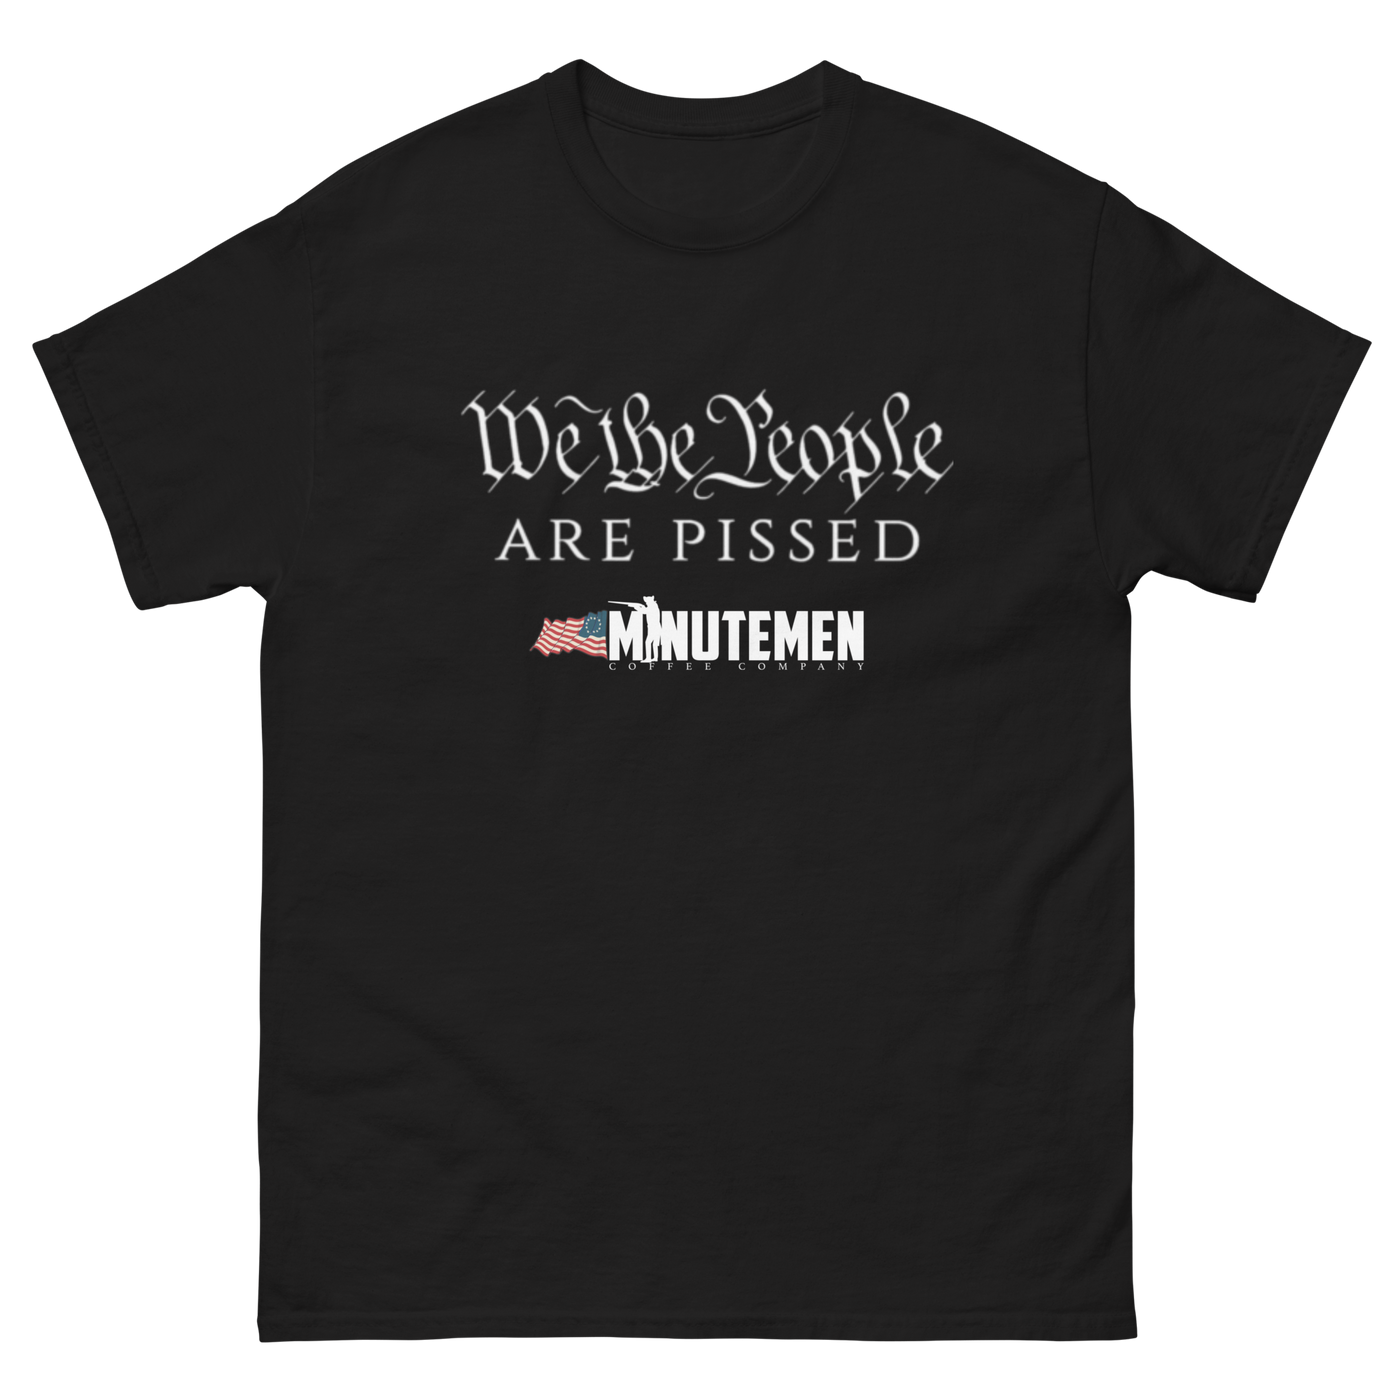 We the People are PISSED Men's classic tee